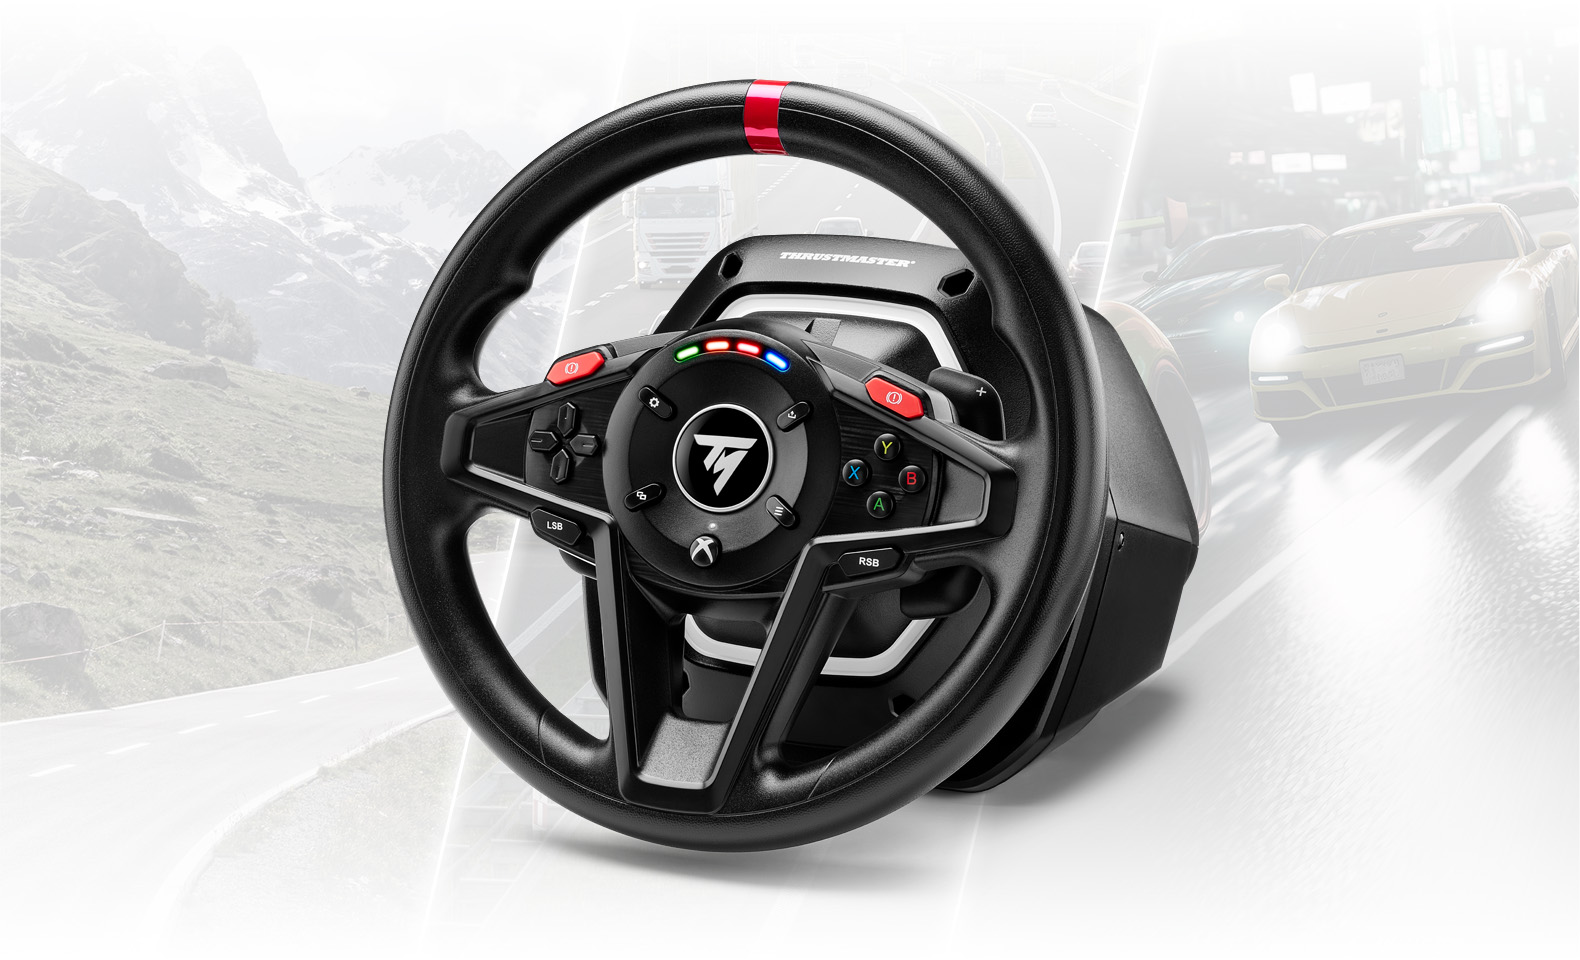 T128: The Force Feedback racing wheel to get started in racing simulation -  Thrustmaster